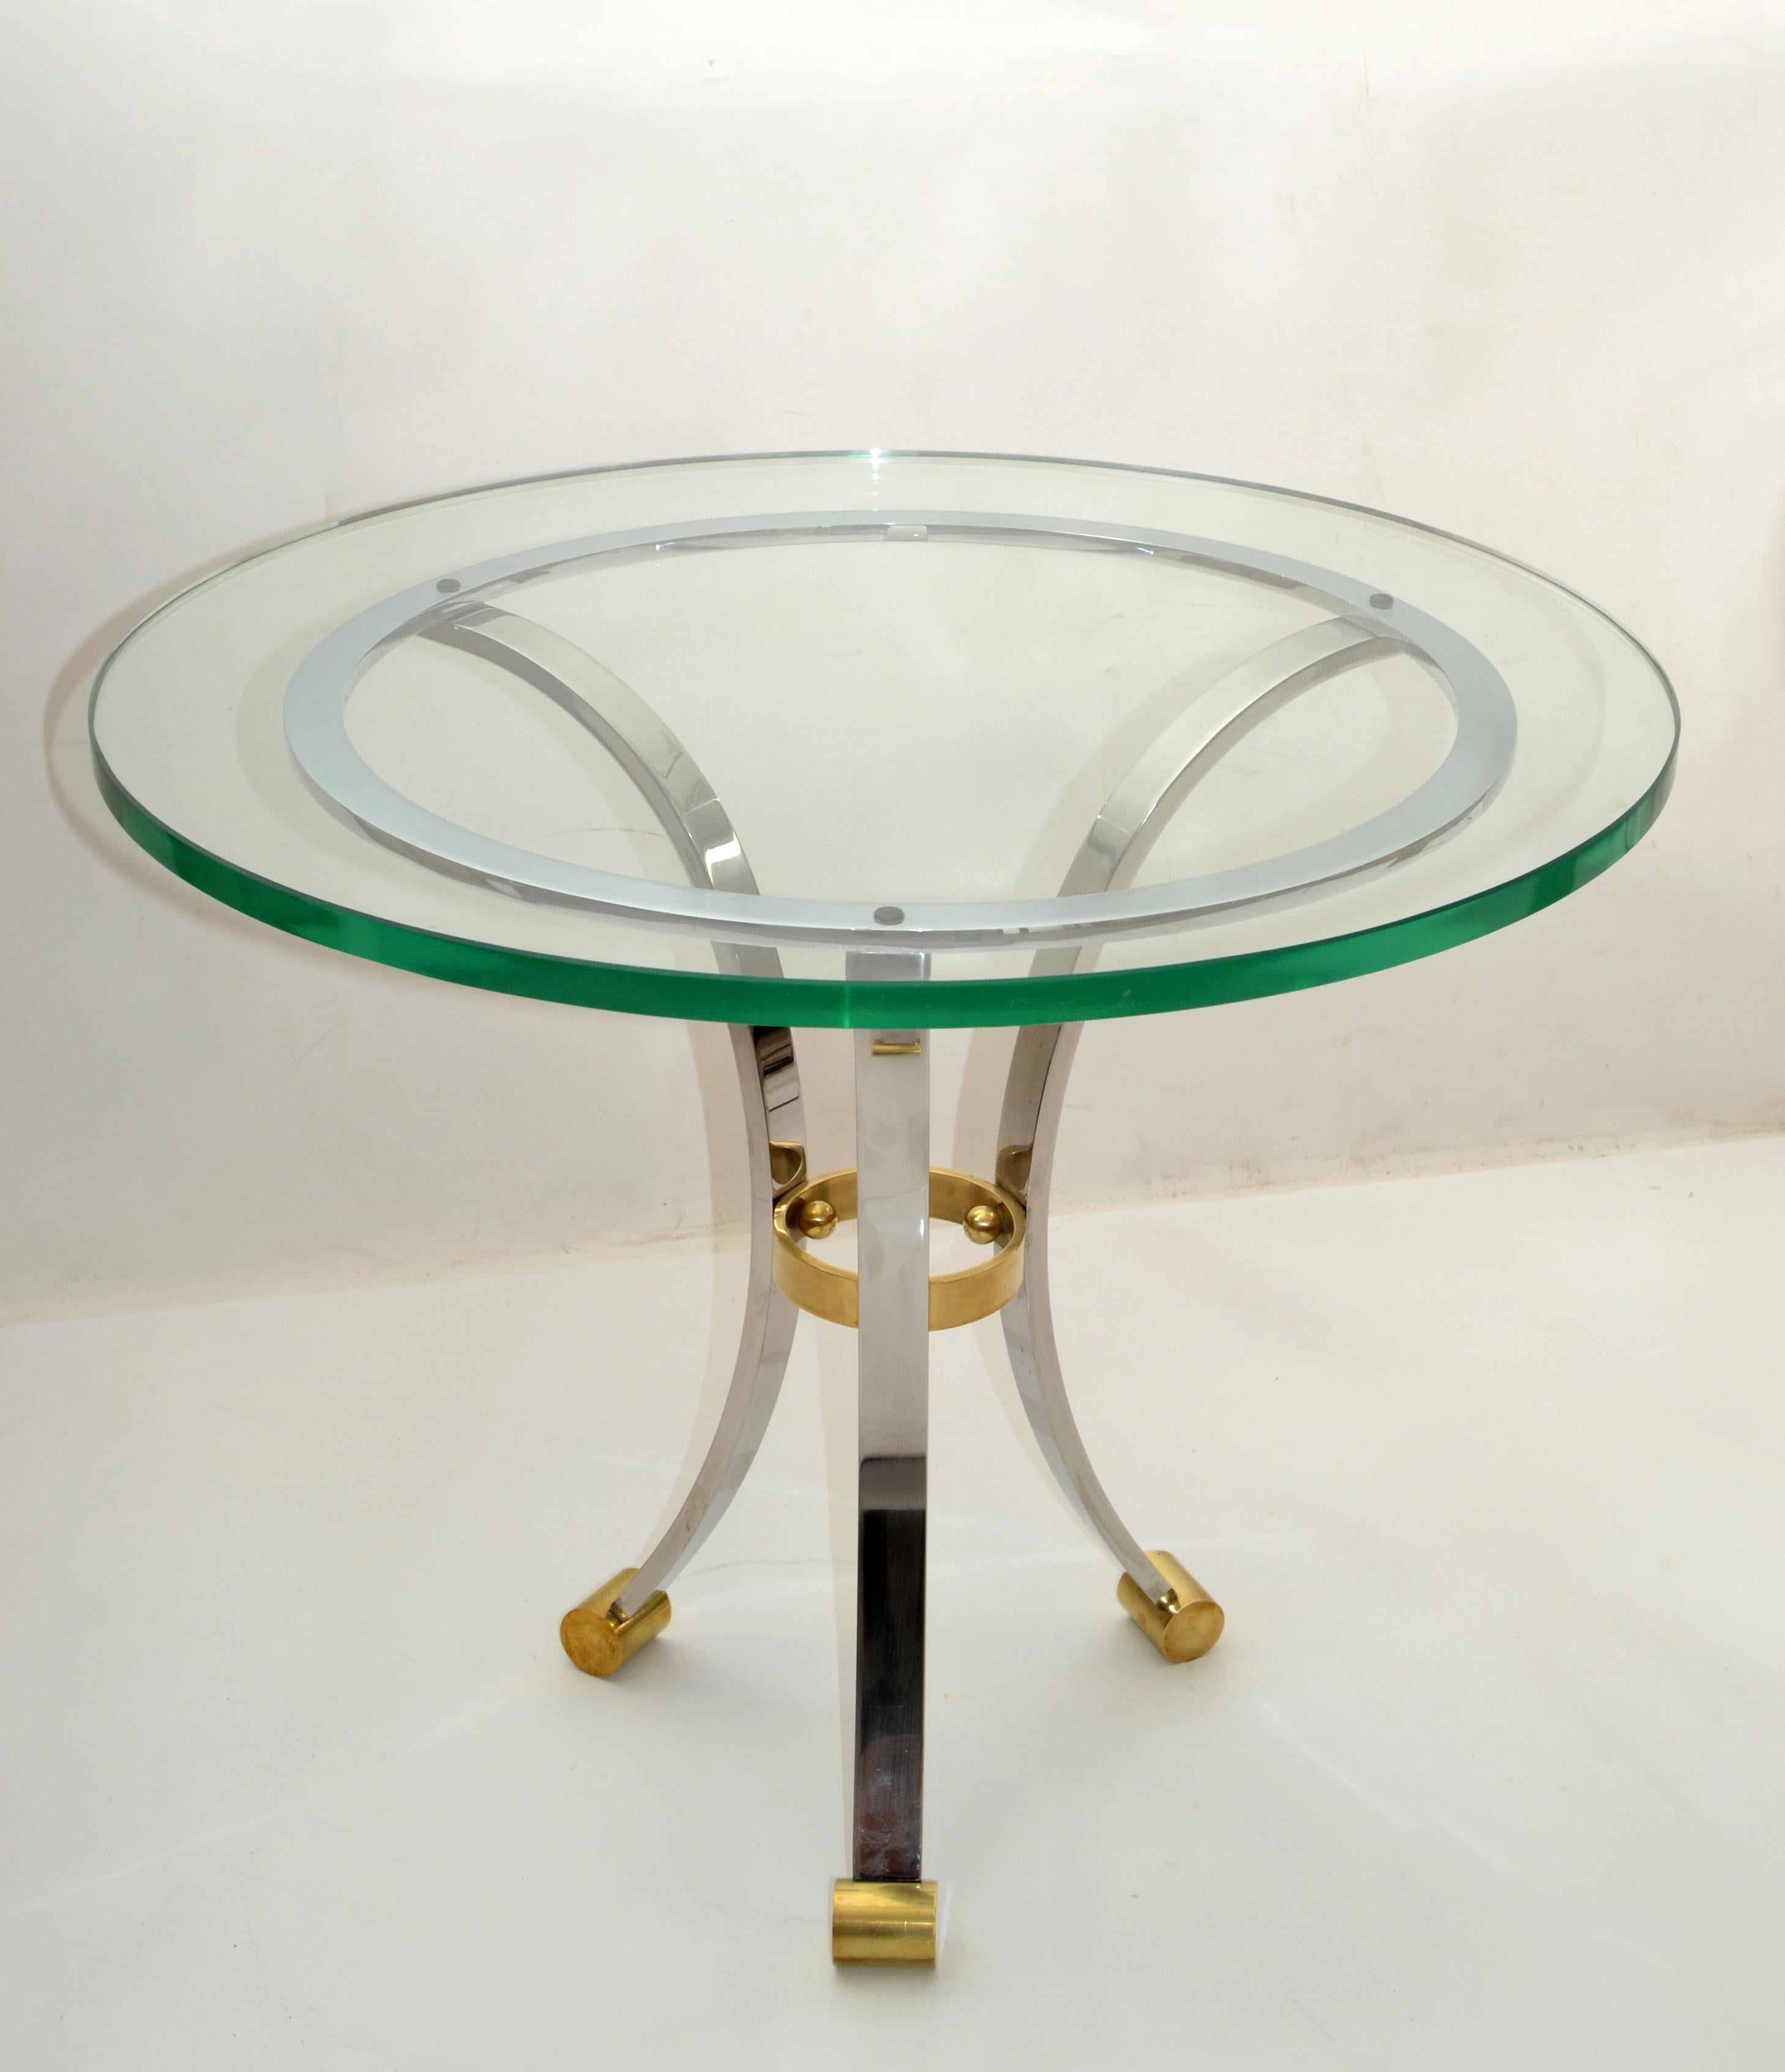 Mid-20th Century French Maison Jansen Round Glass, Brass & Steel Coffee Table Neoclassical, 1960s For Sale